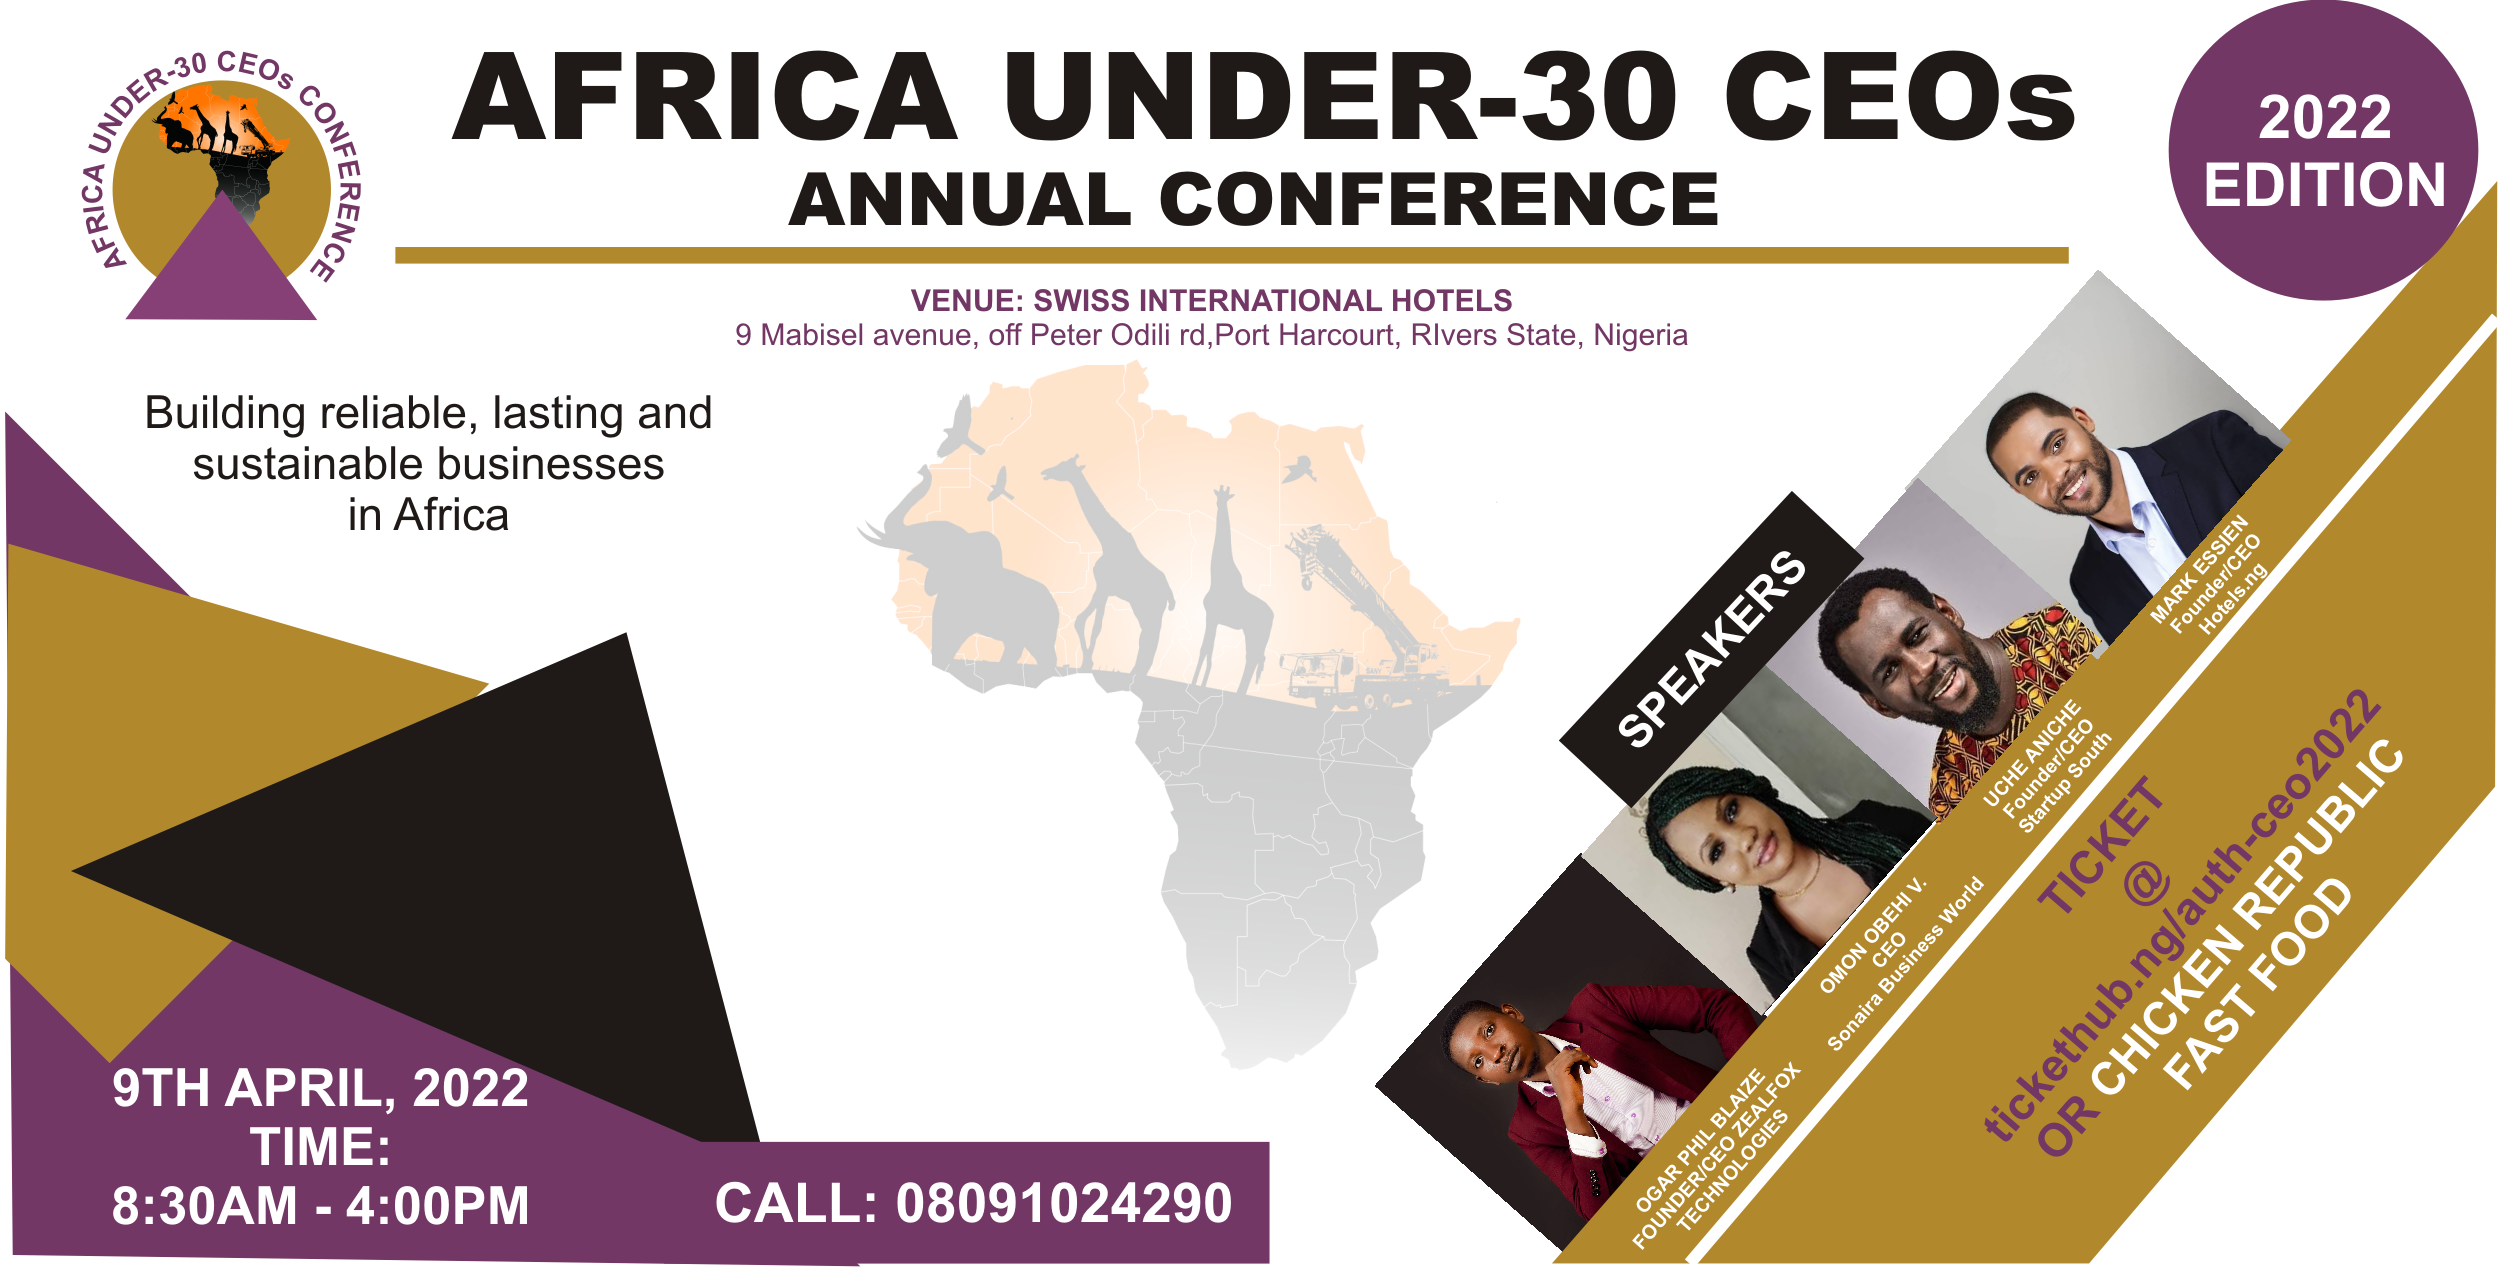 AFRICA UNDER-30 CEOs CONFERENCE, 2022 Post free event in Nigeria using tickethub.ng, buy and sell tickets to event